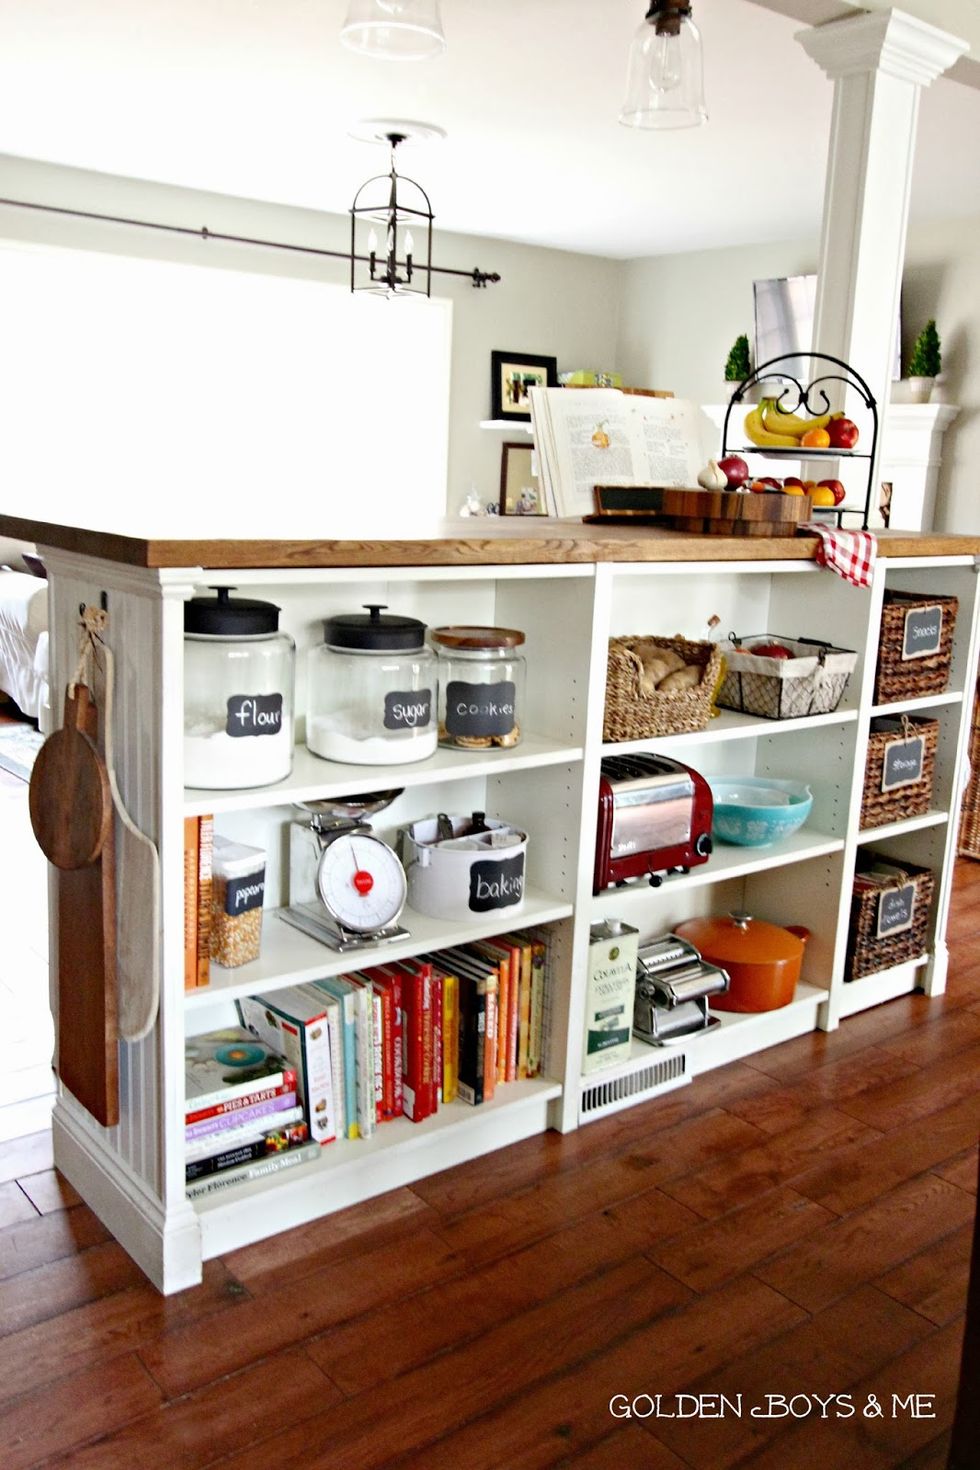 11 IKEA Hacks for Small Kitchens - How to Hack IKEA For Kitchen Storage